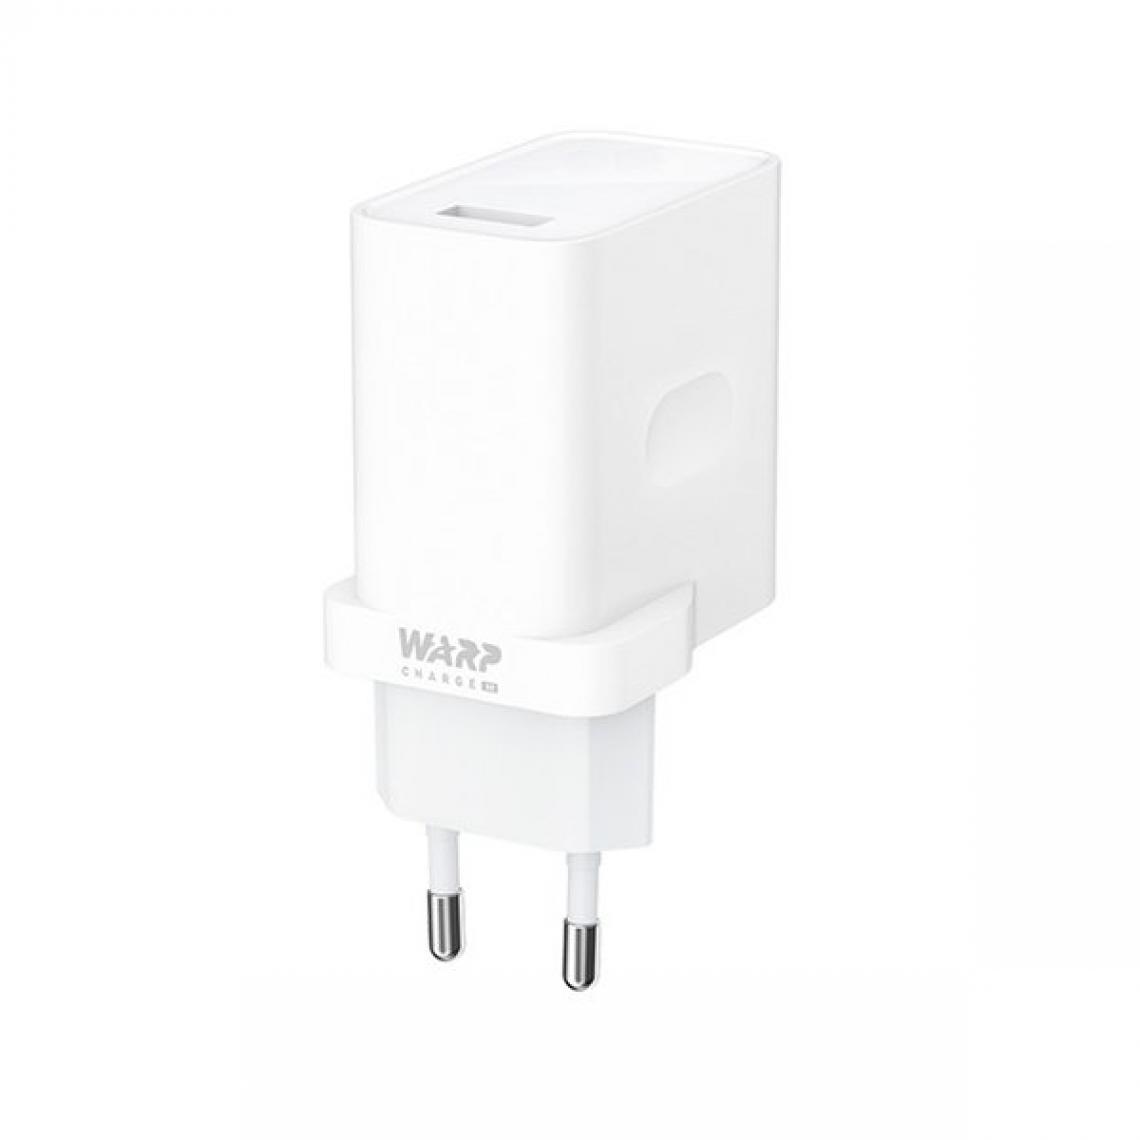 Phonecare - Chargeur Warp Charge 30 Fast Charge Power Adapter pour OnePlus 3 - Autres accessoires smartphone